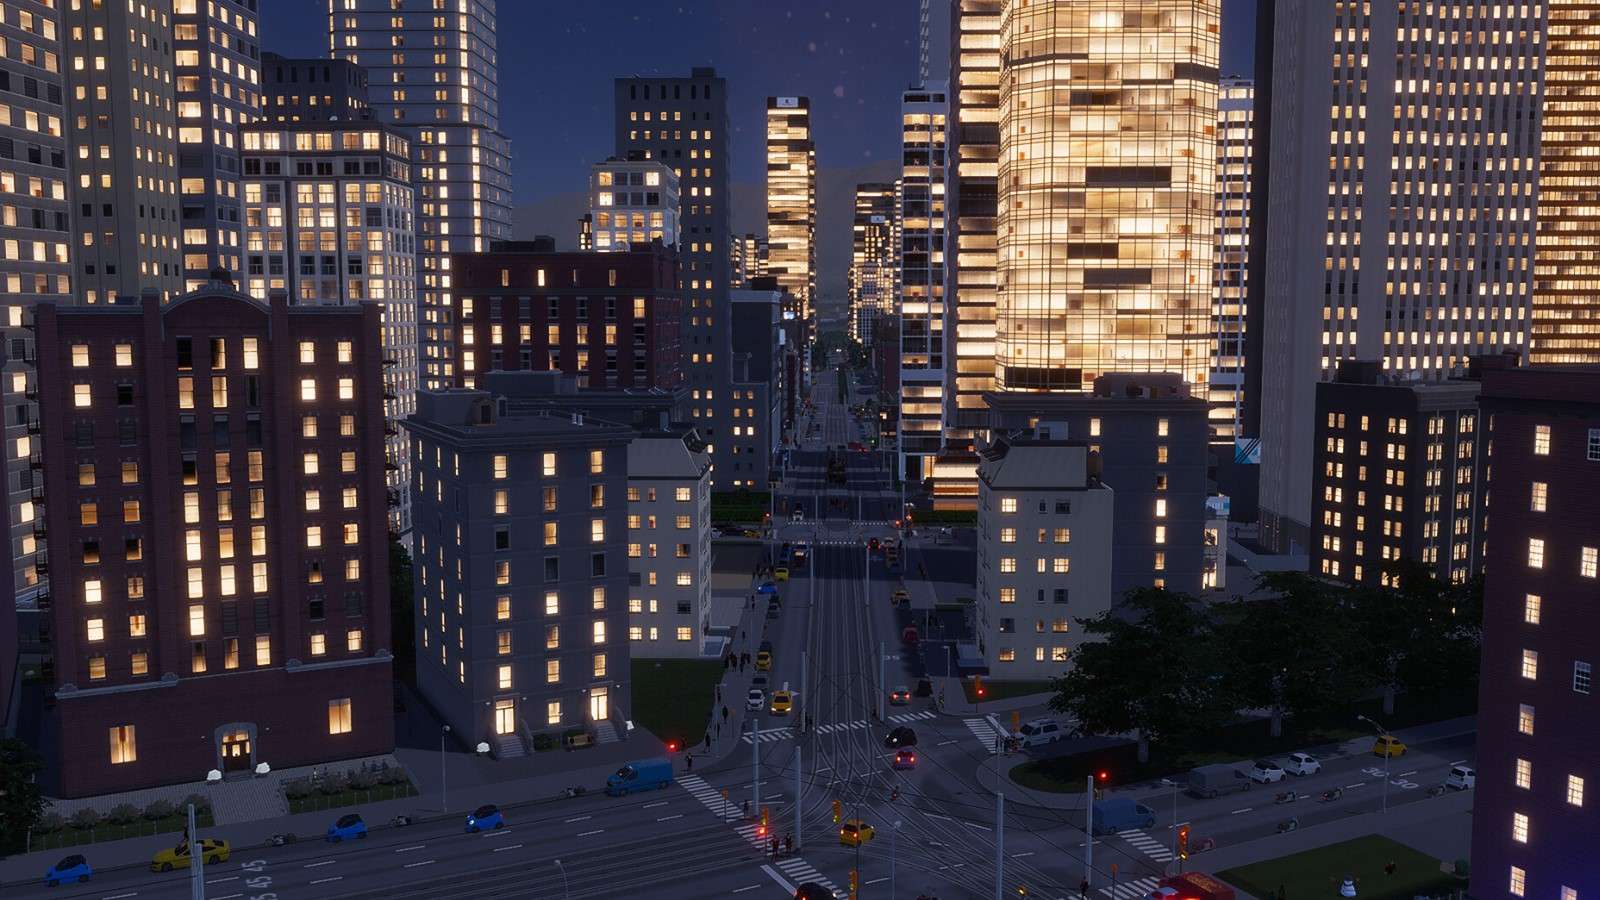 A city of skyscrapers at night in Cities Skylines 2